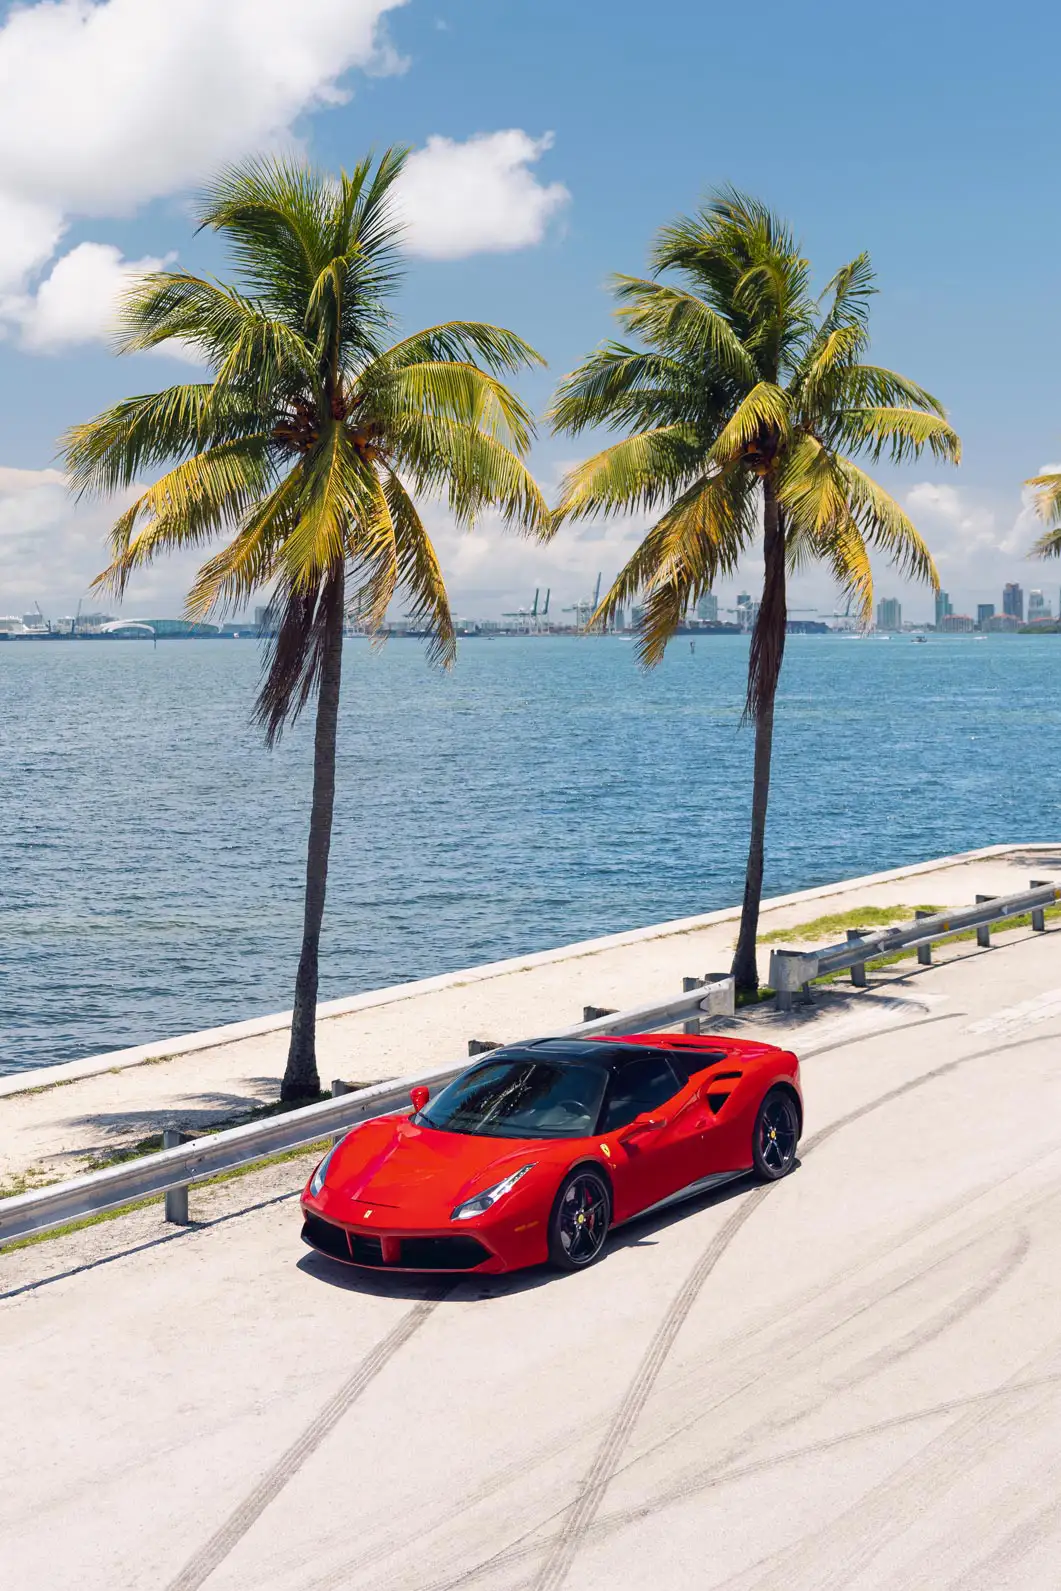 Ferrari 488 sitting beside the Miami water: a presence like no other.